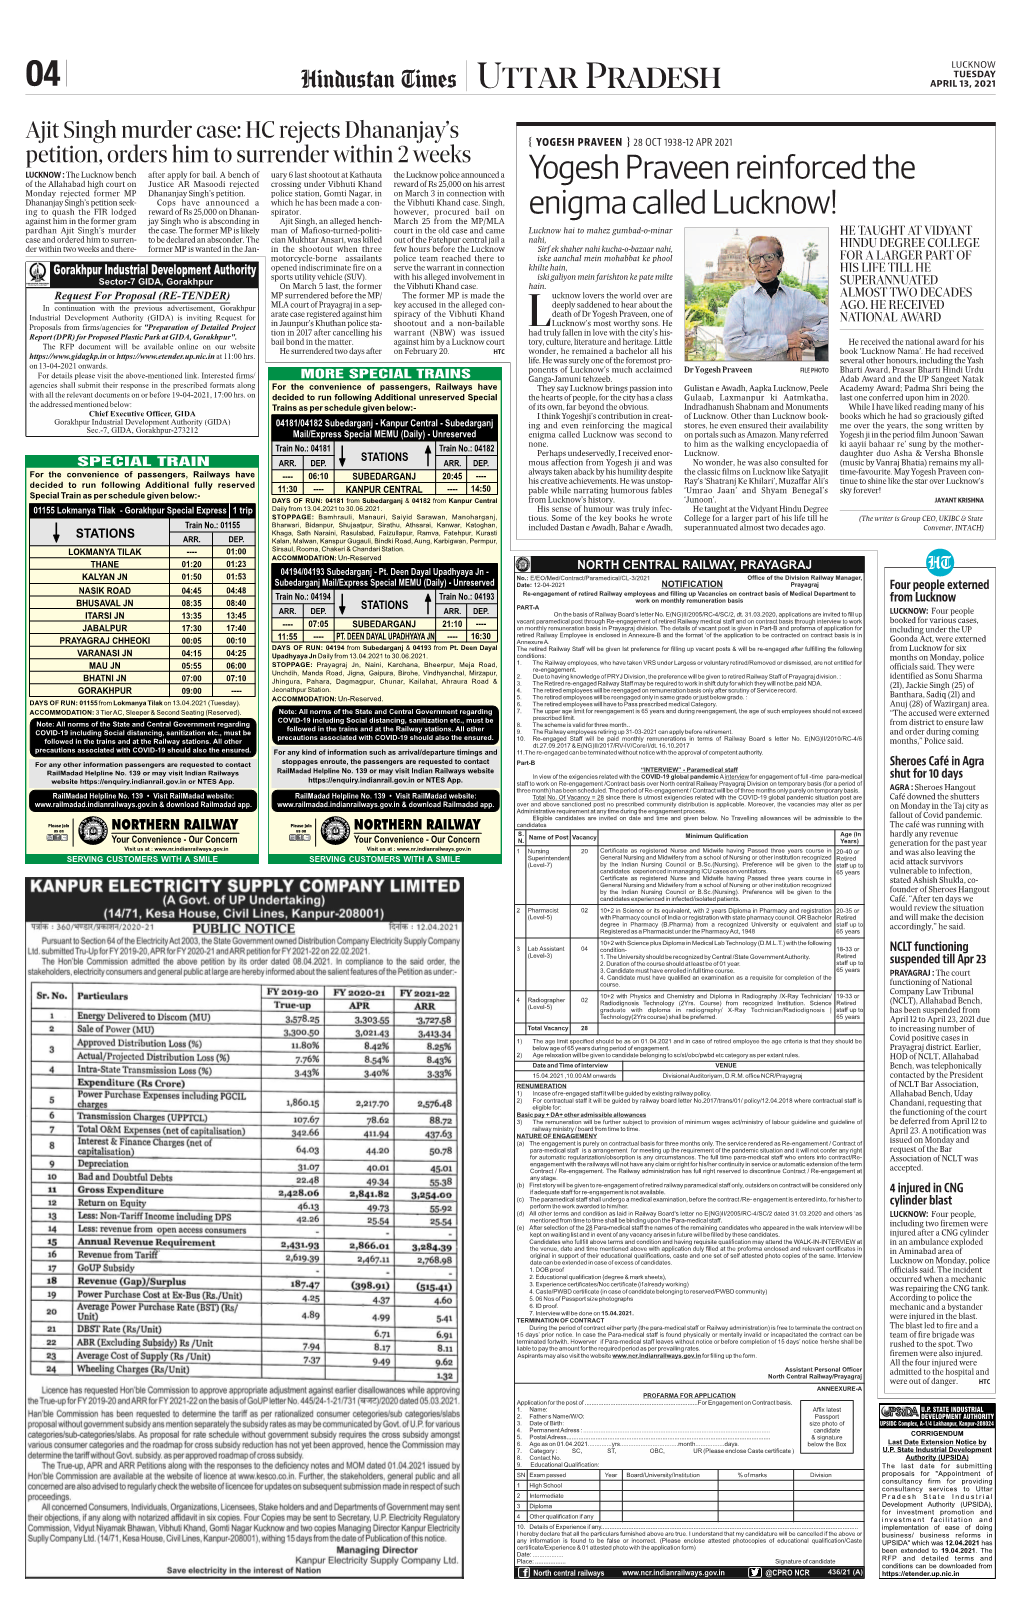 Public Notice Published in News Papers Hindustan Times On